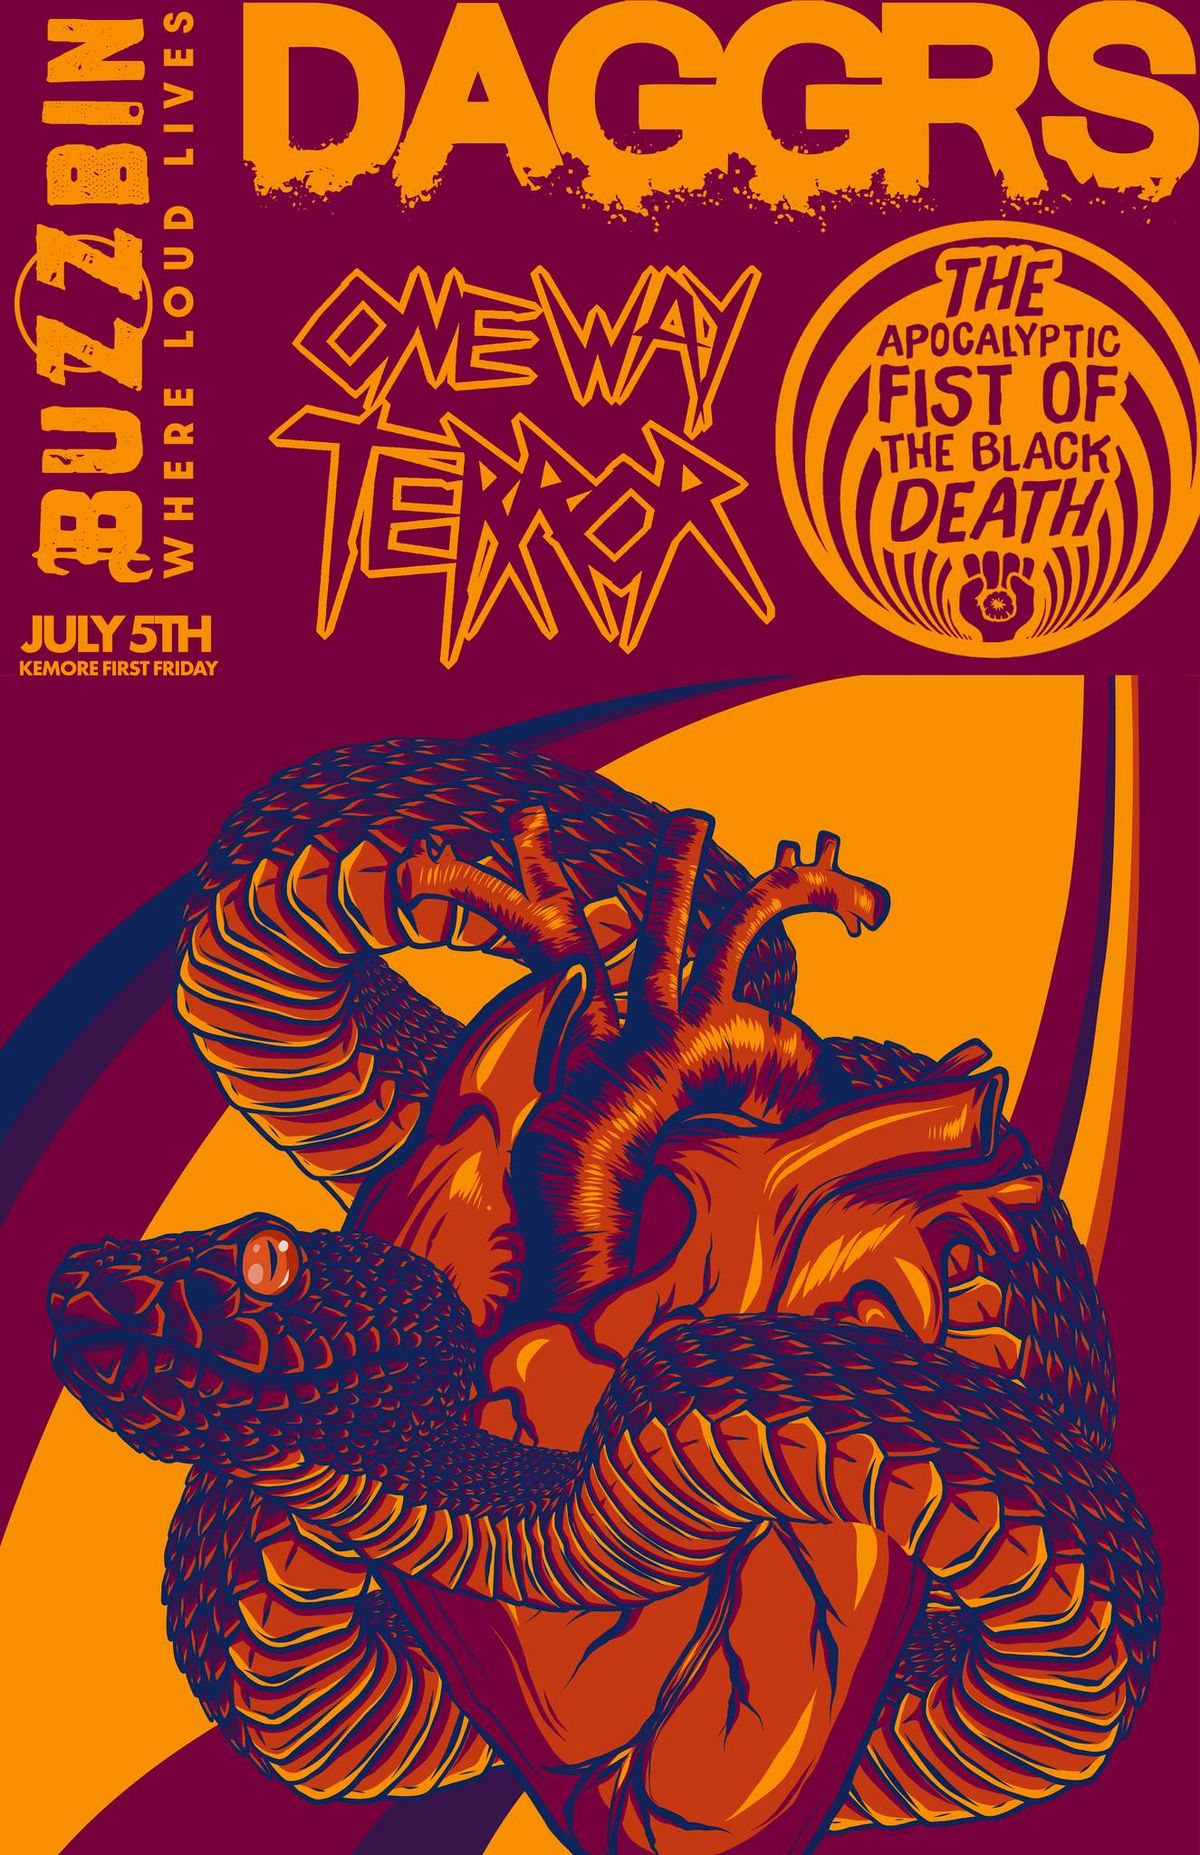 KENMORE FIRST FRIDAY: DAGGRS\/ APOCALYPTIC FIST Of THE BLACK DEATH\/ ONE WAY TERROR \/ FATAL UNION